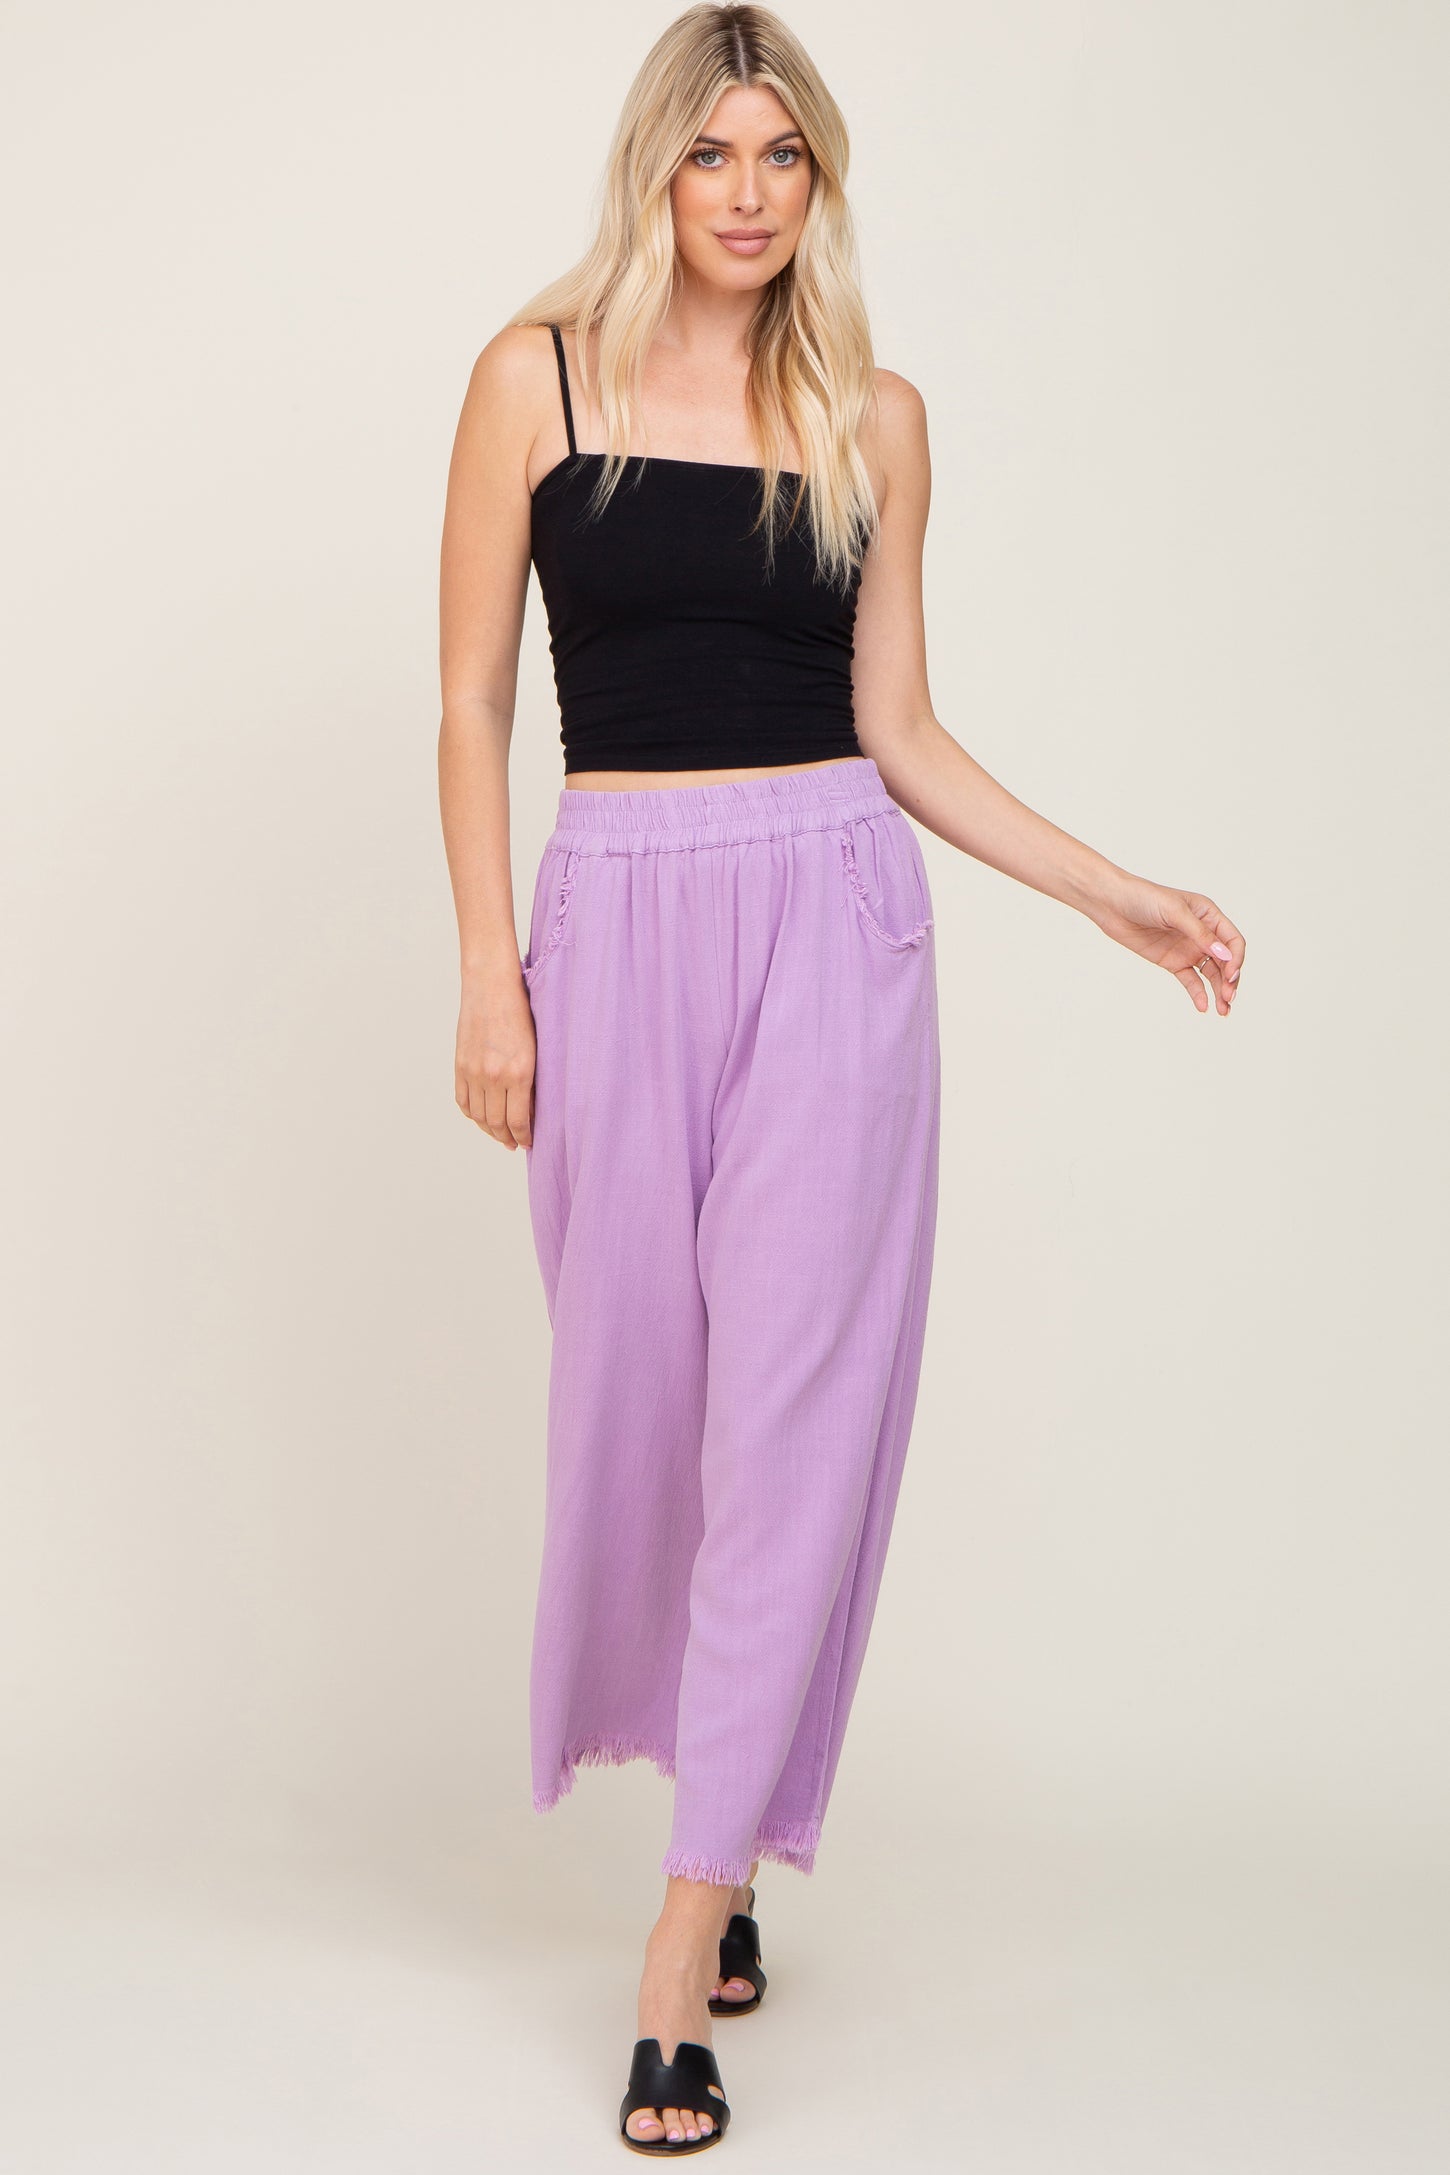 Linen PALAZZO Pants, 28, 30, 32, 34 Inches Inseam Options, Wide